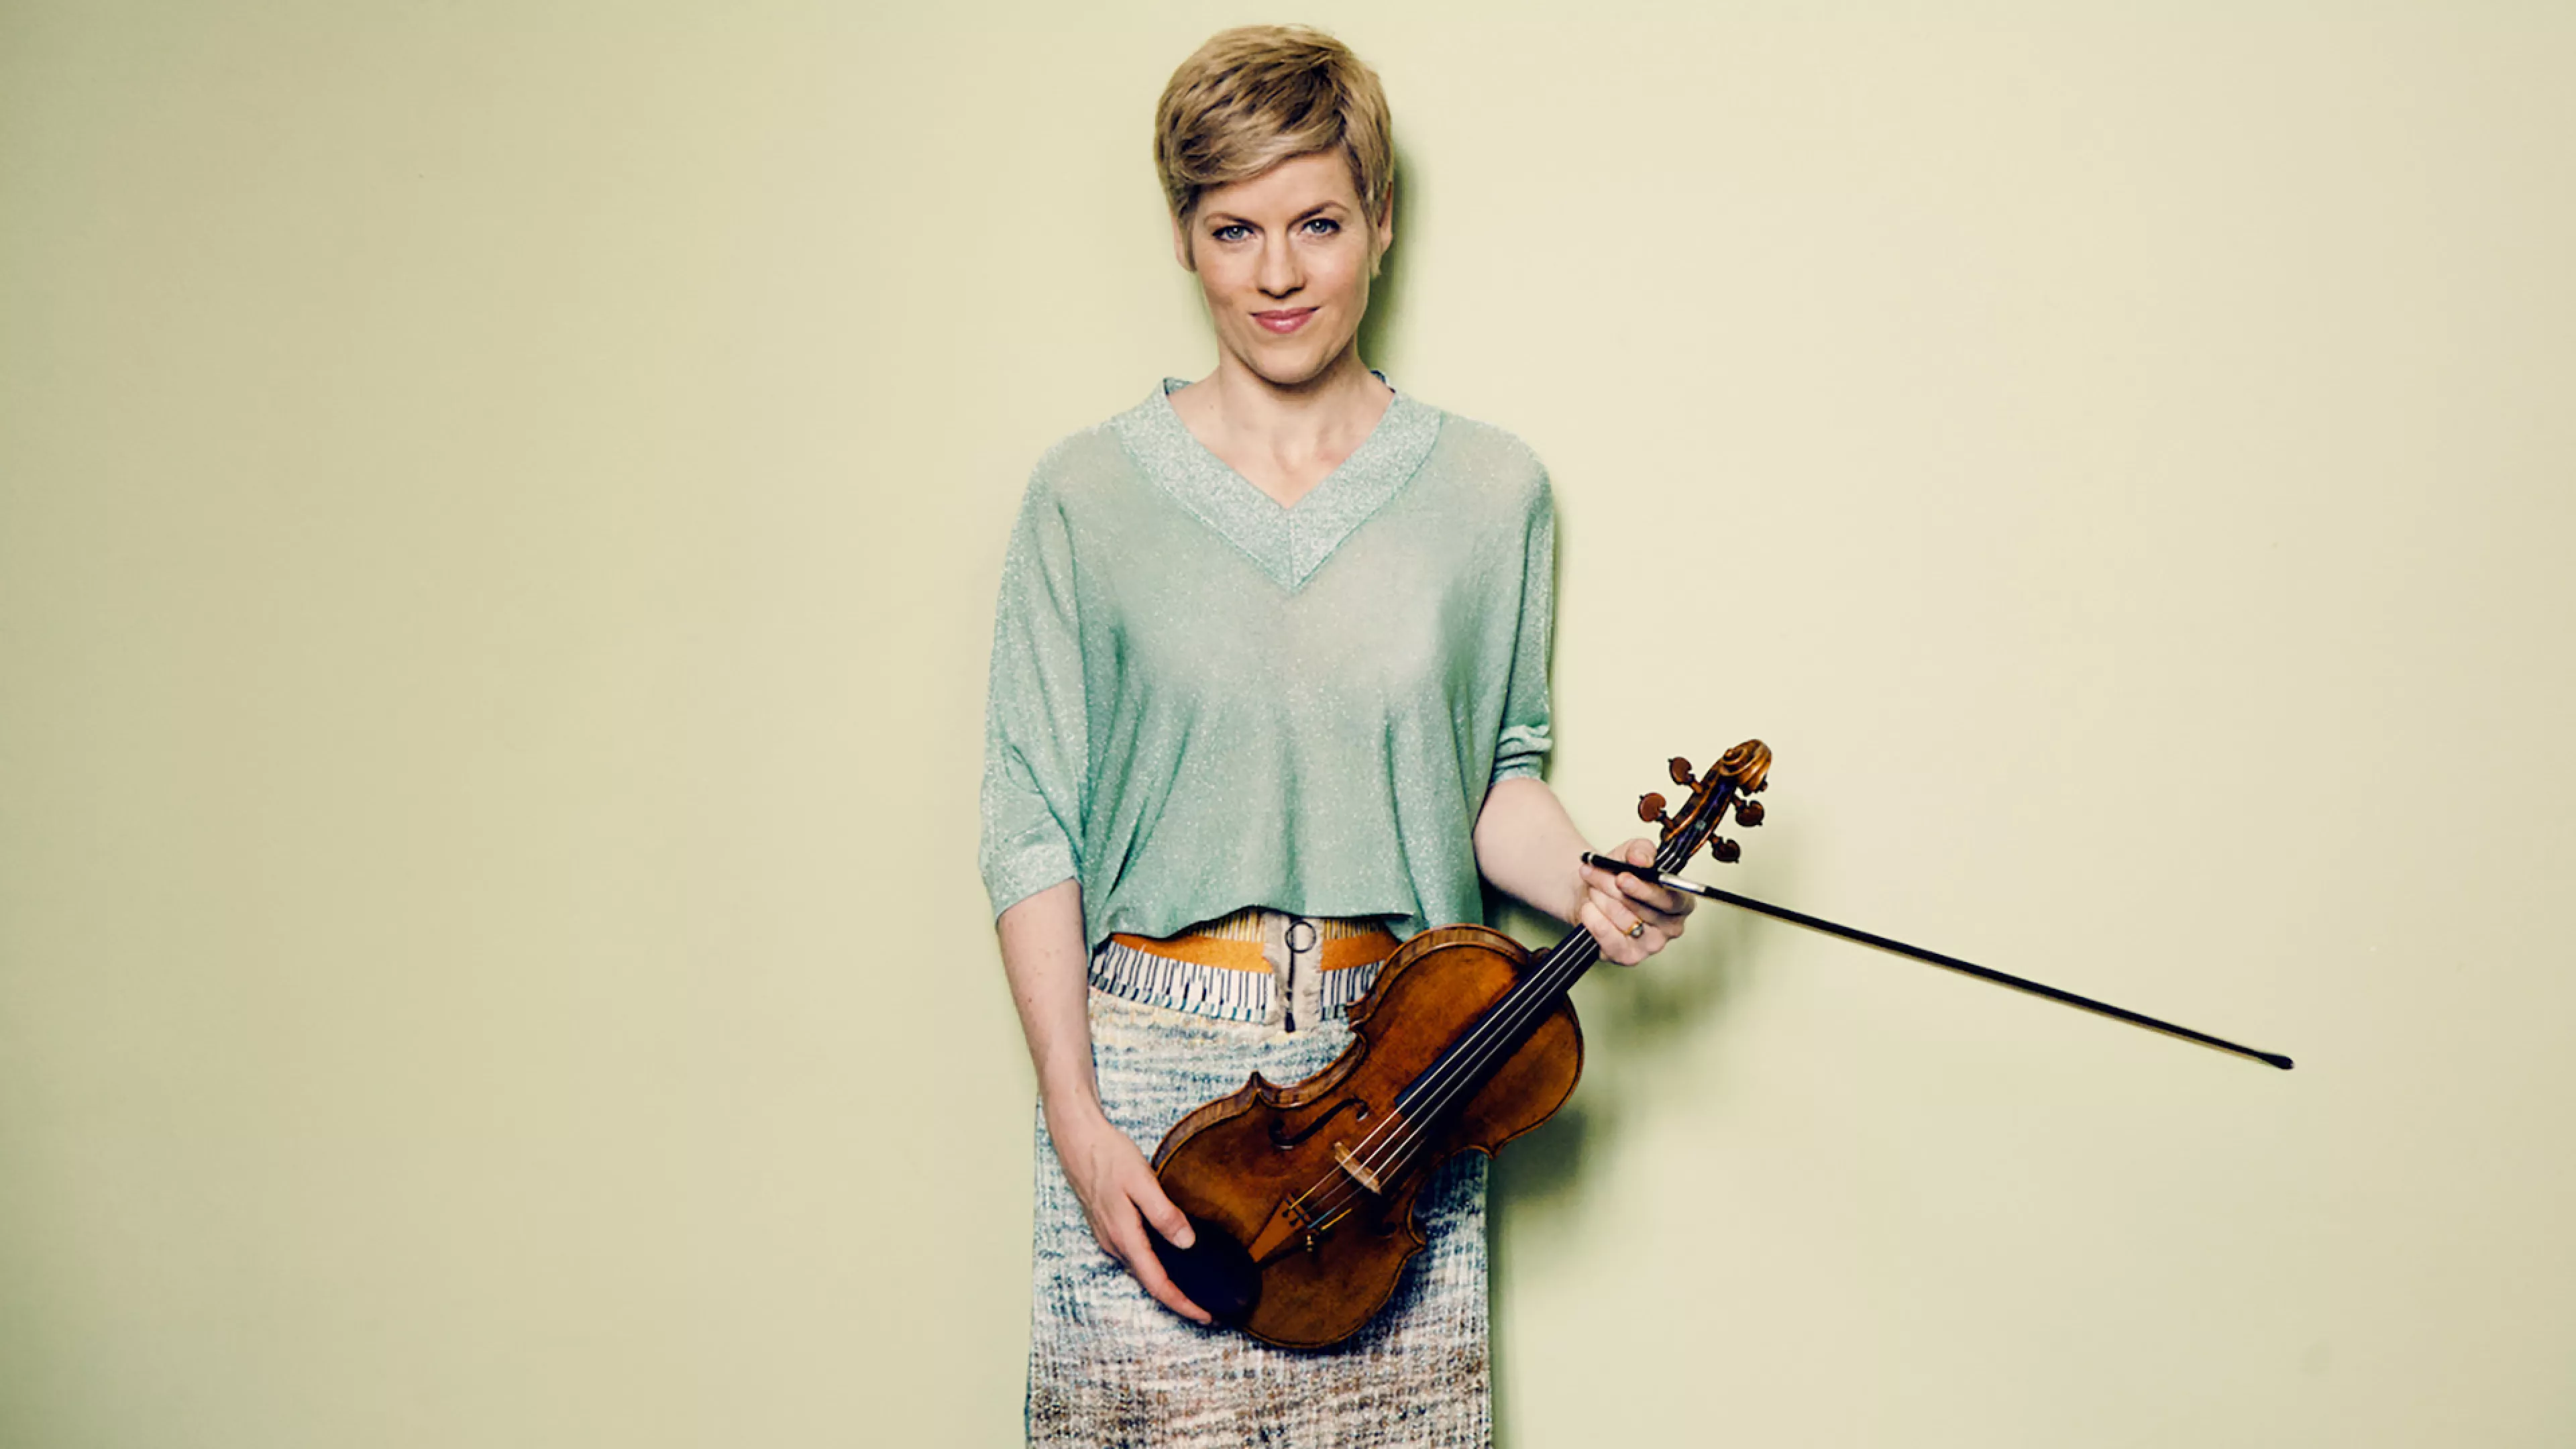 Isabelle Faust
